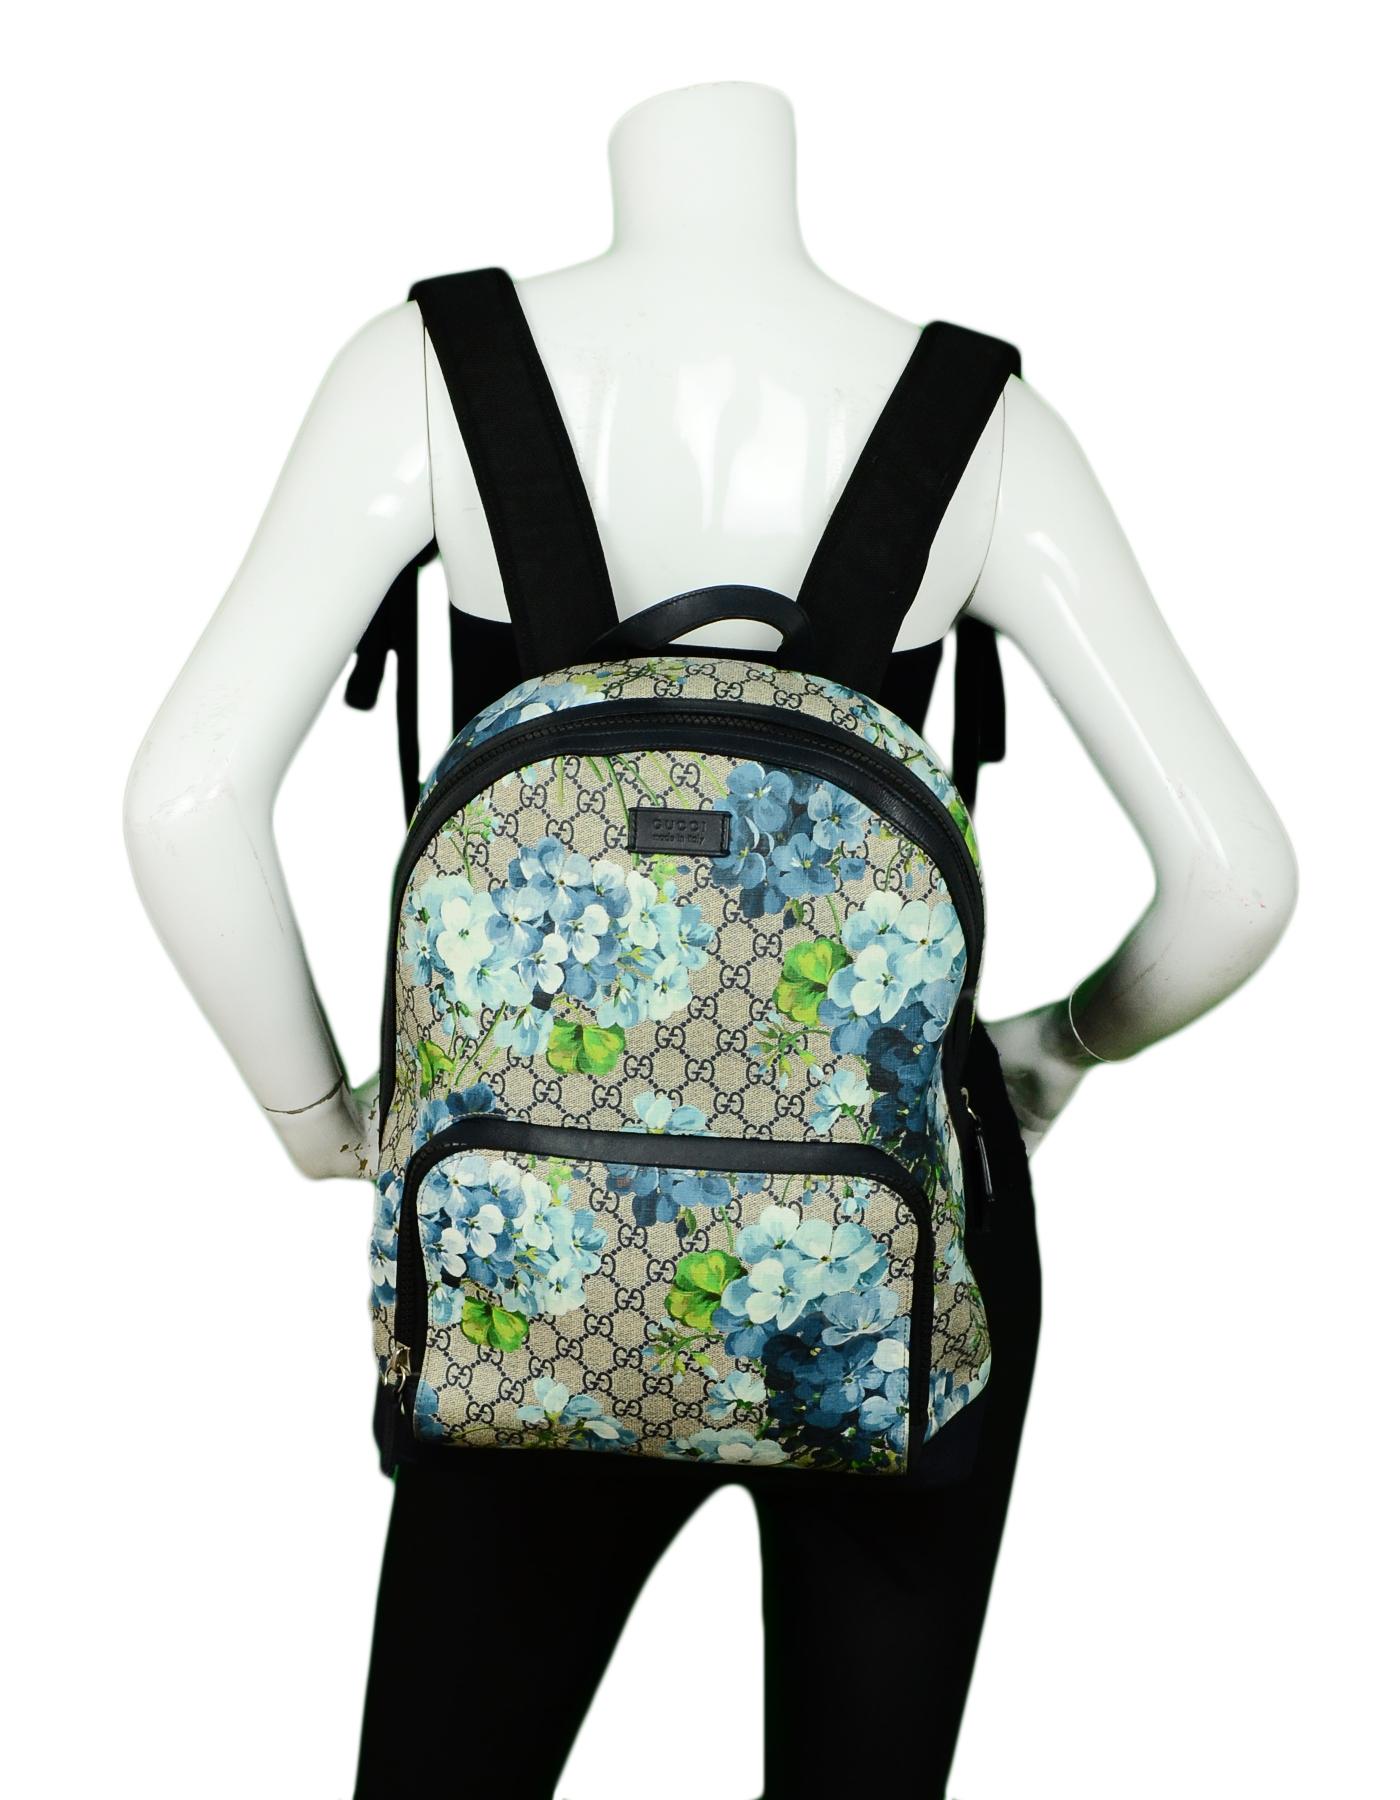 gucci blooms backpack blue